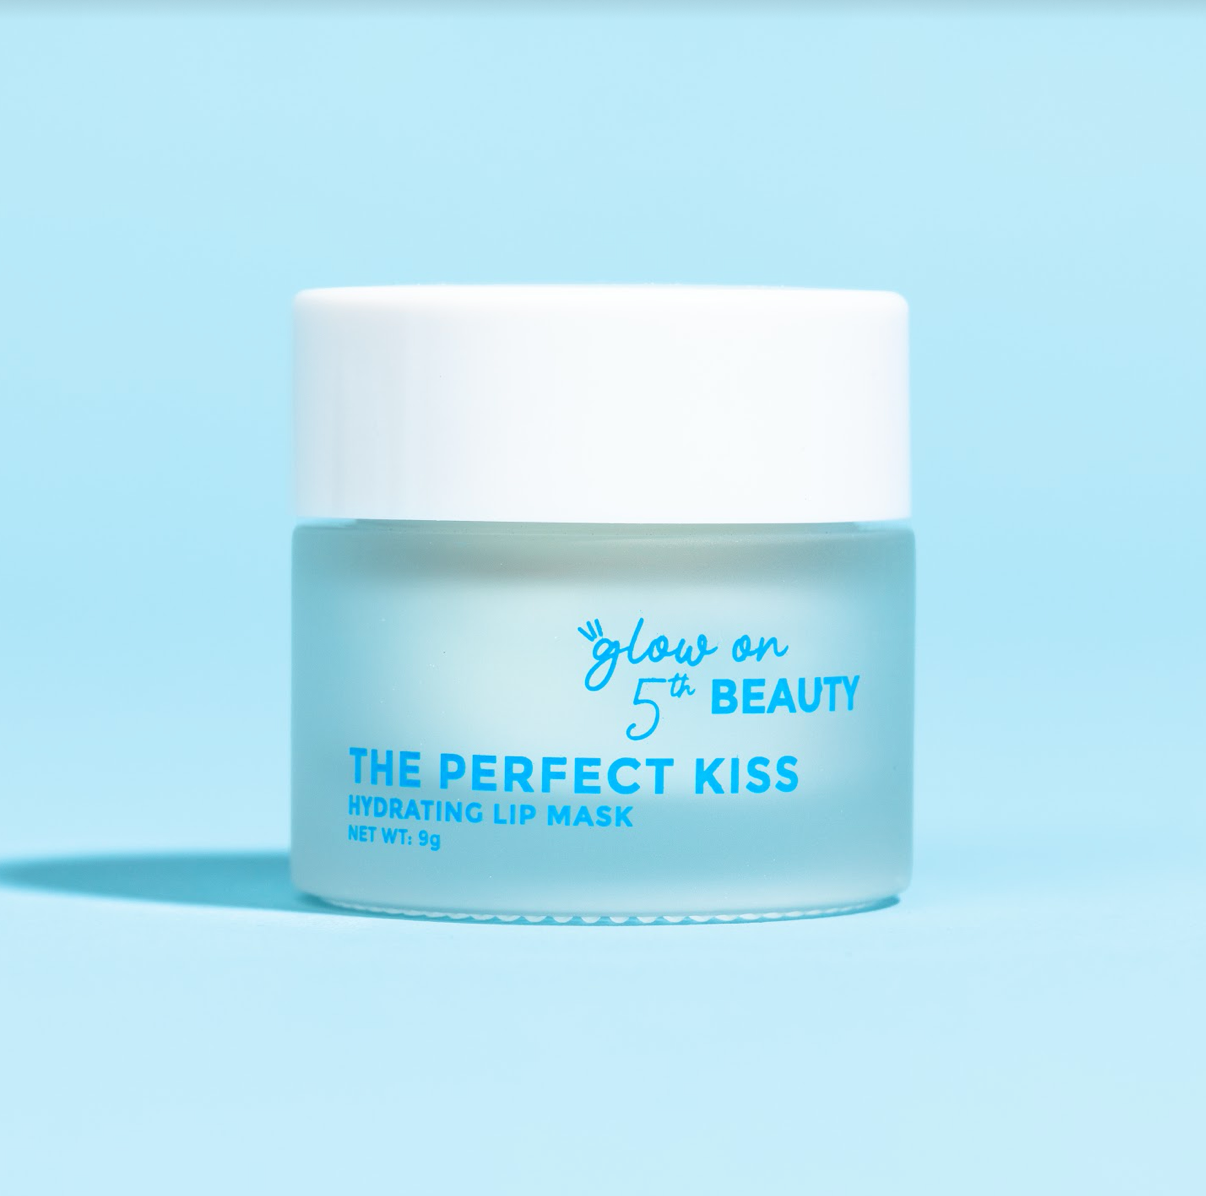 THE PERFECT KISS - Hydrating Lip Mask